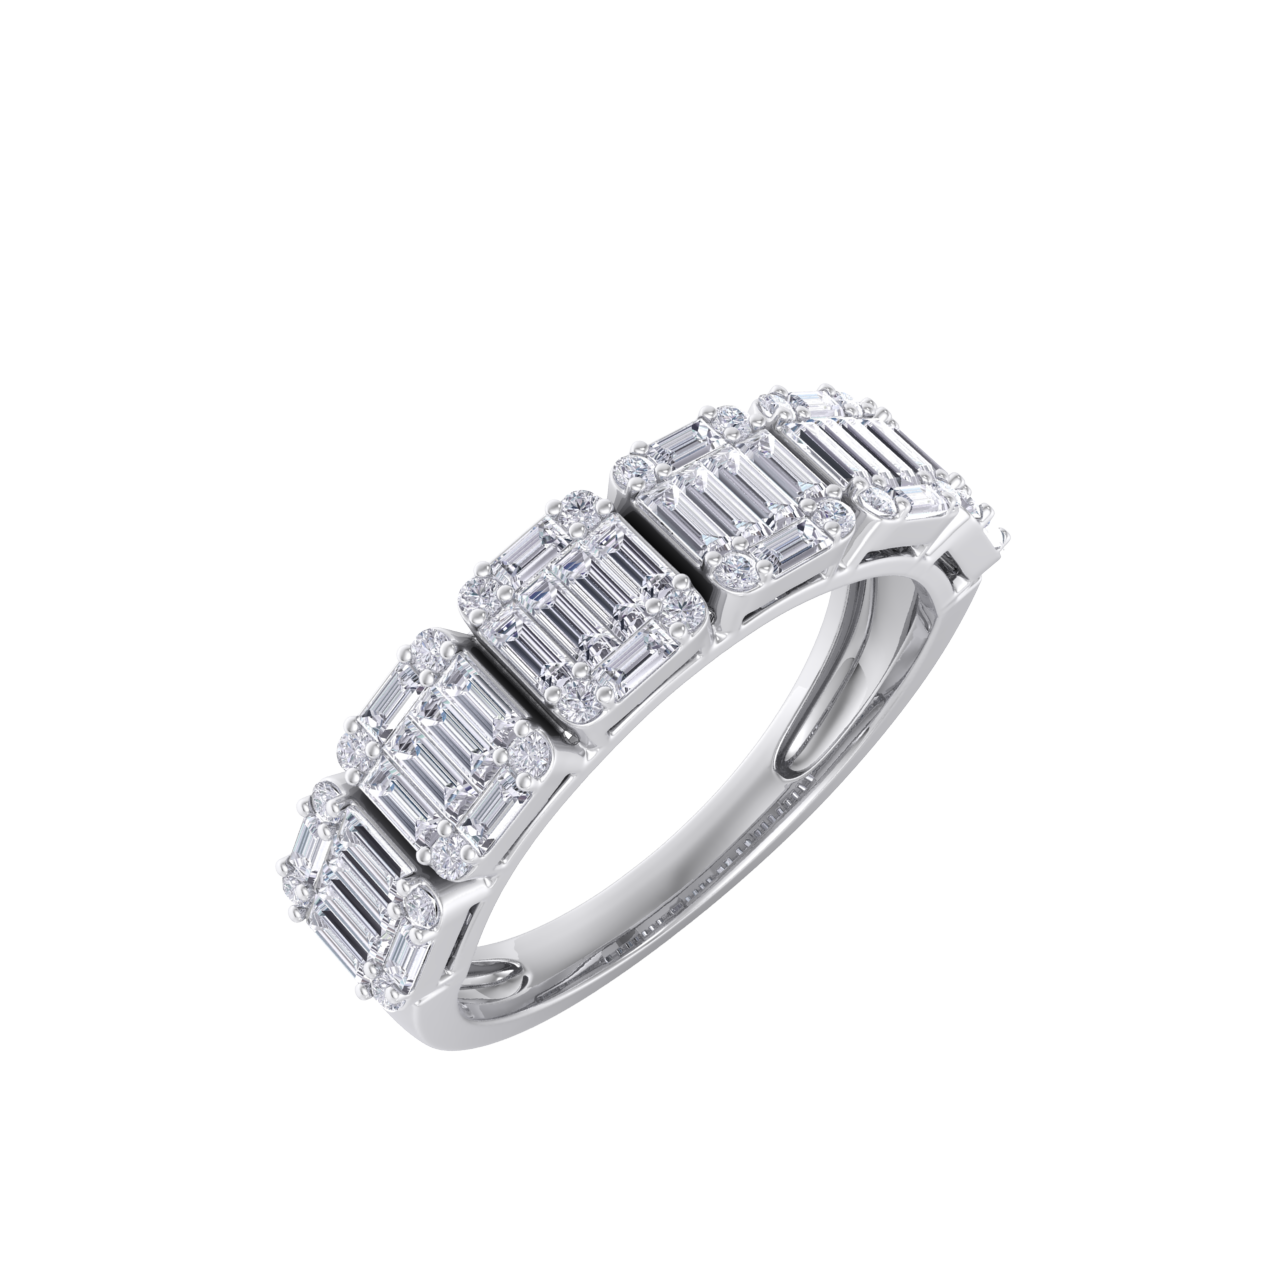 Anniversary ring with baguette white diamonds in white gold with white diamonds of 2.03 ct in weight